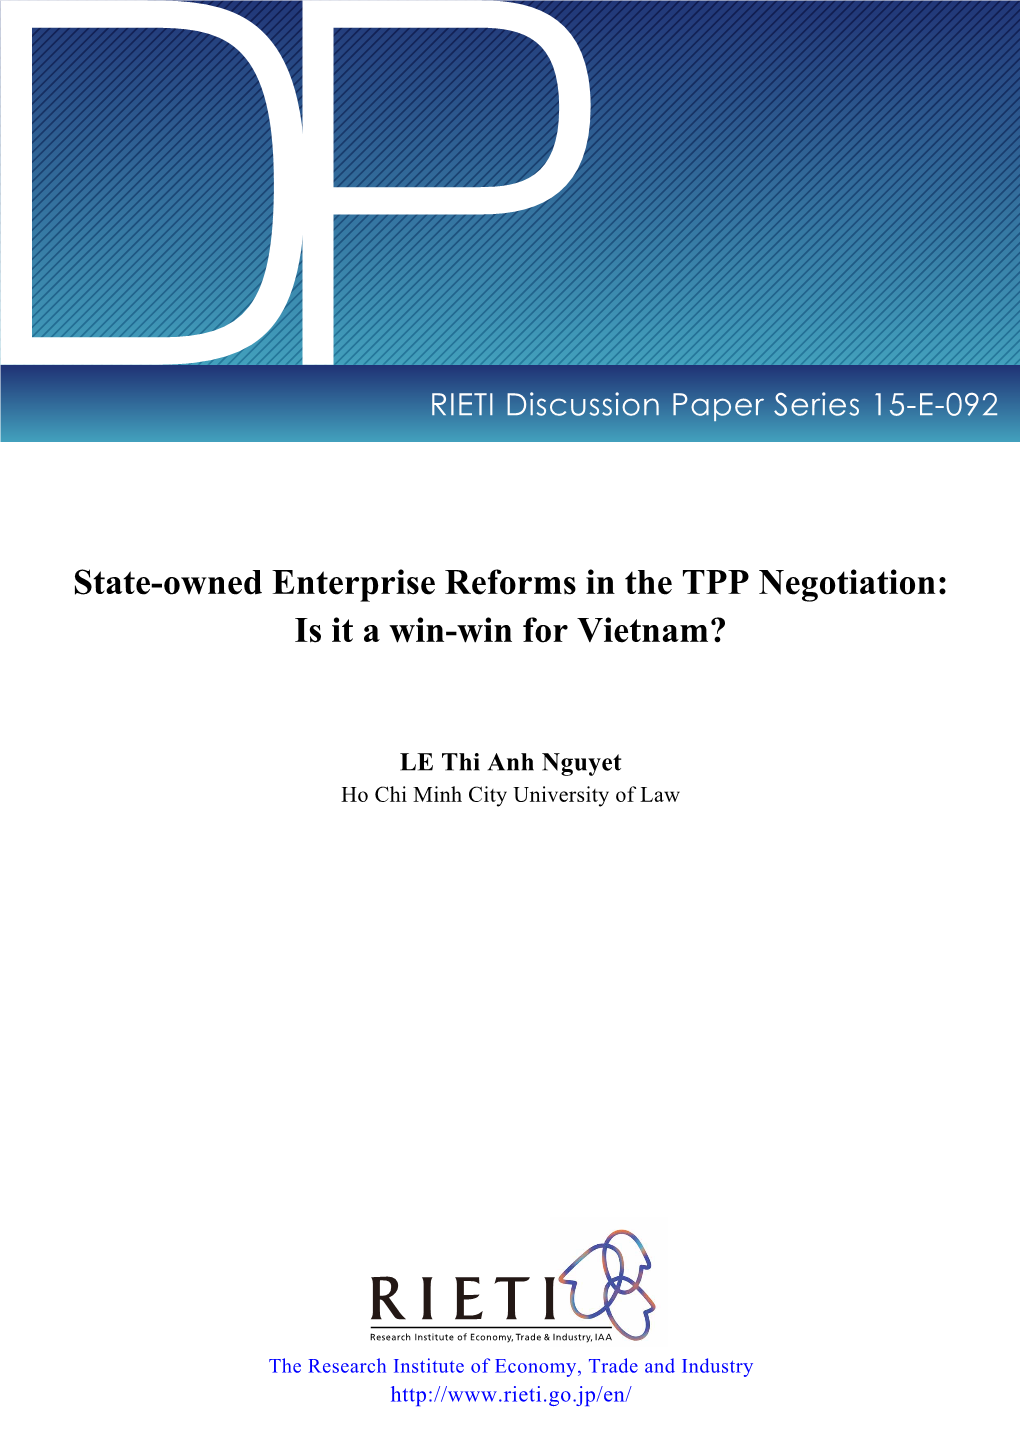 State-Owned Enterprise Reforms in the TPP Negotiation: Is It a Win-Win for Vietnam?